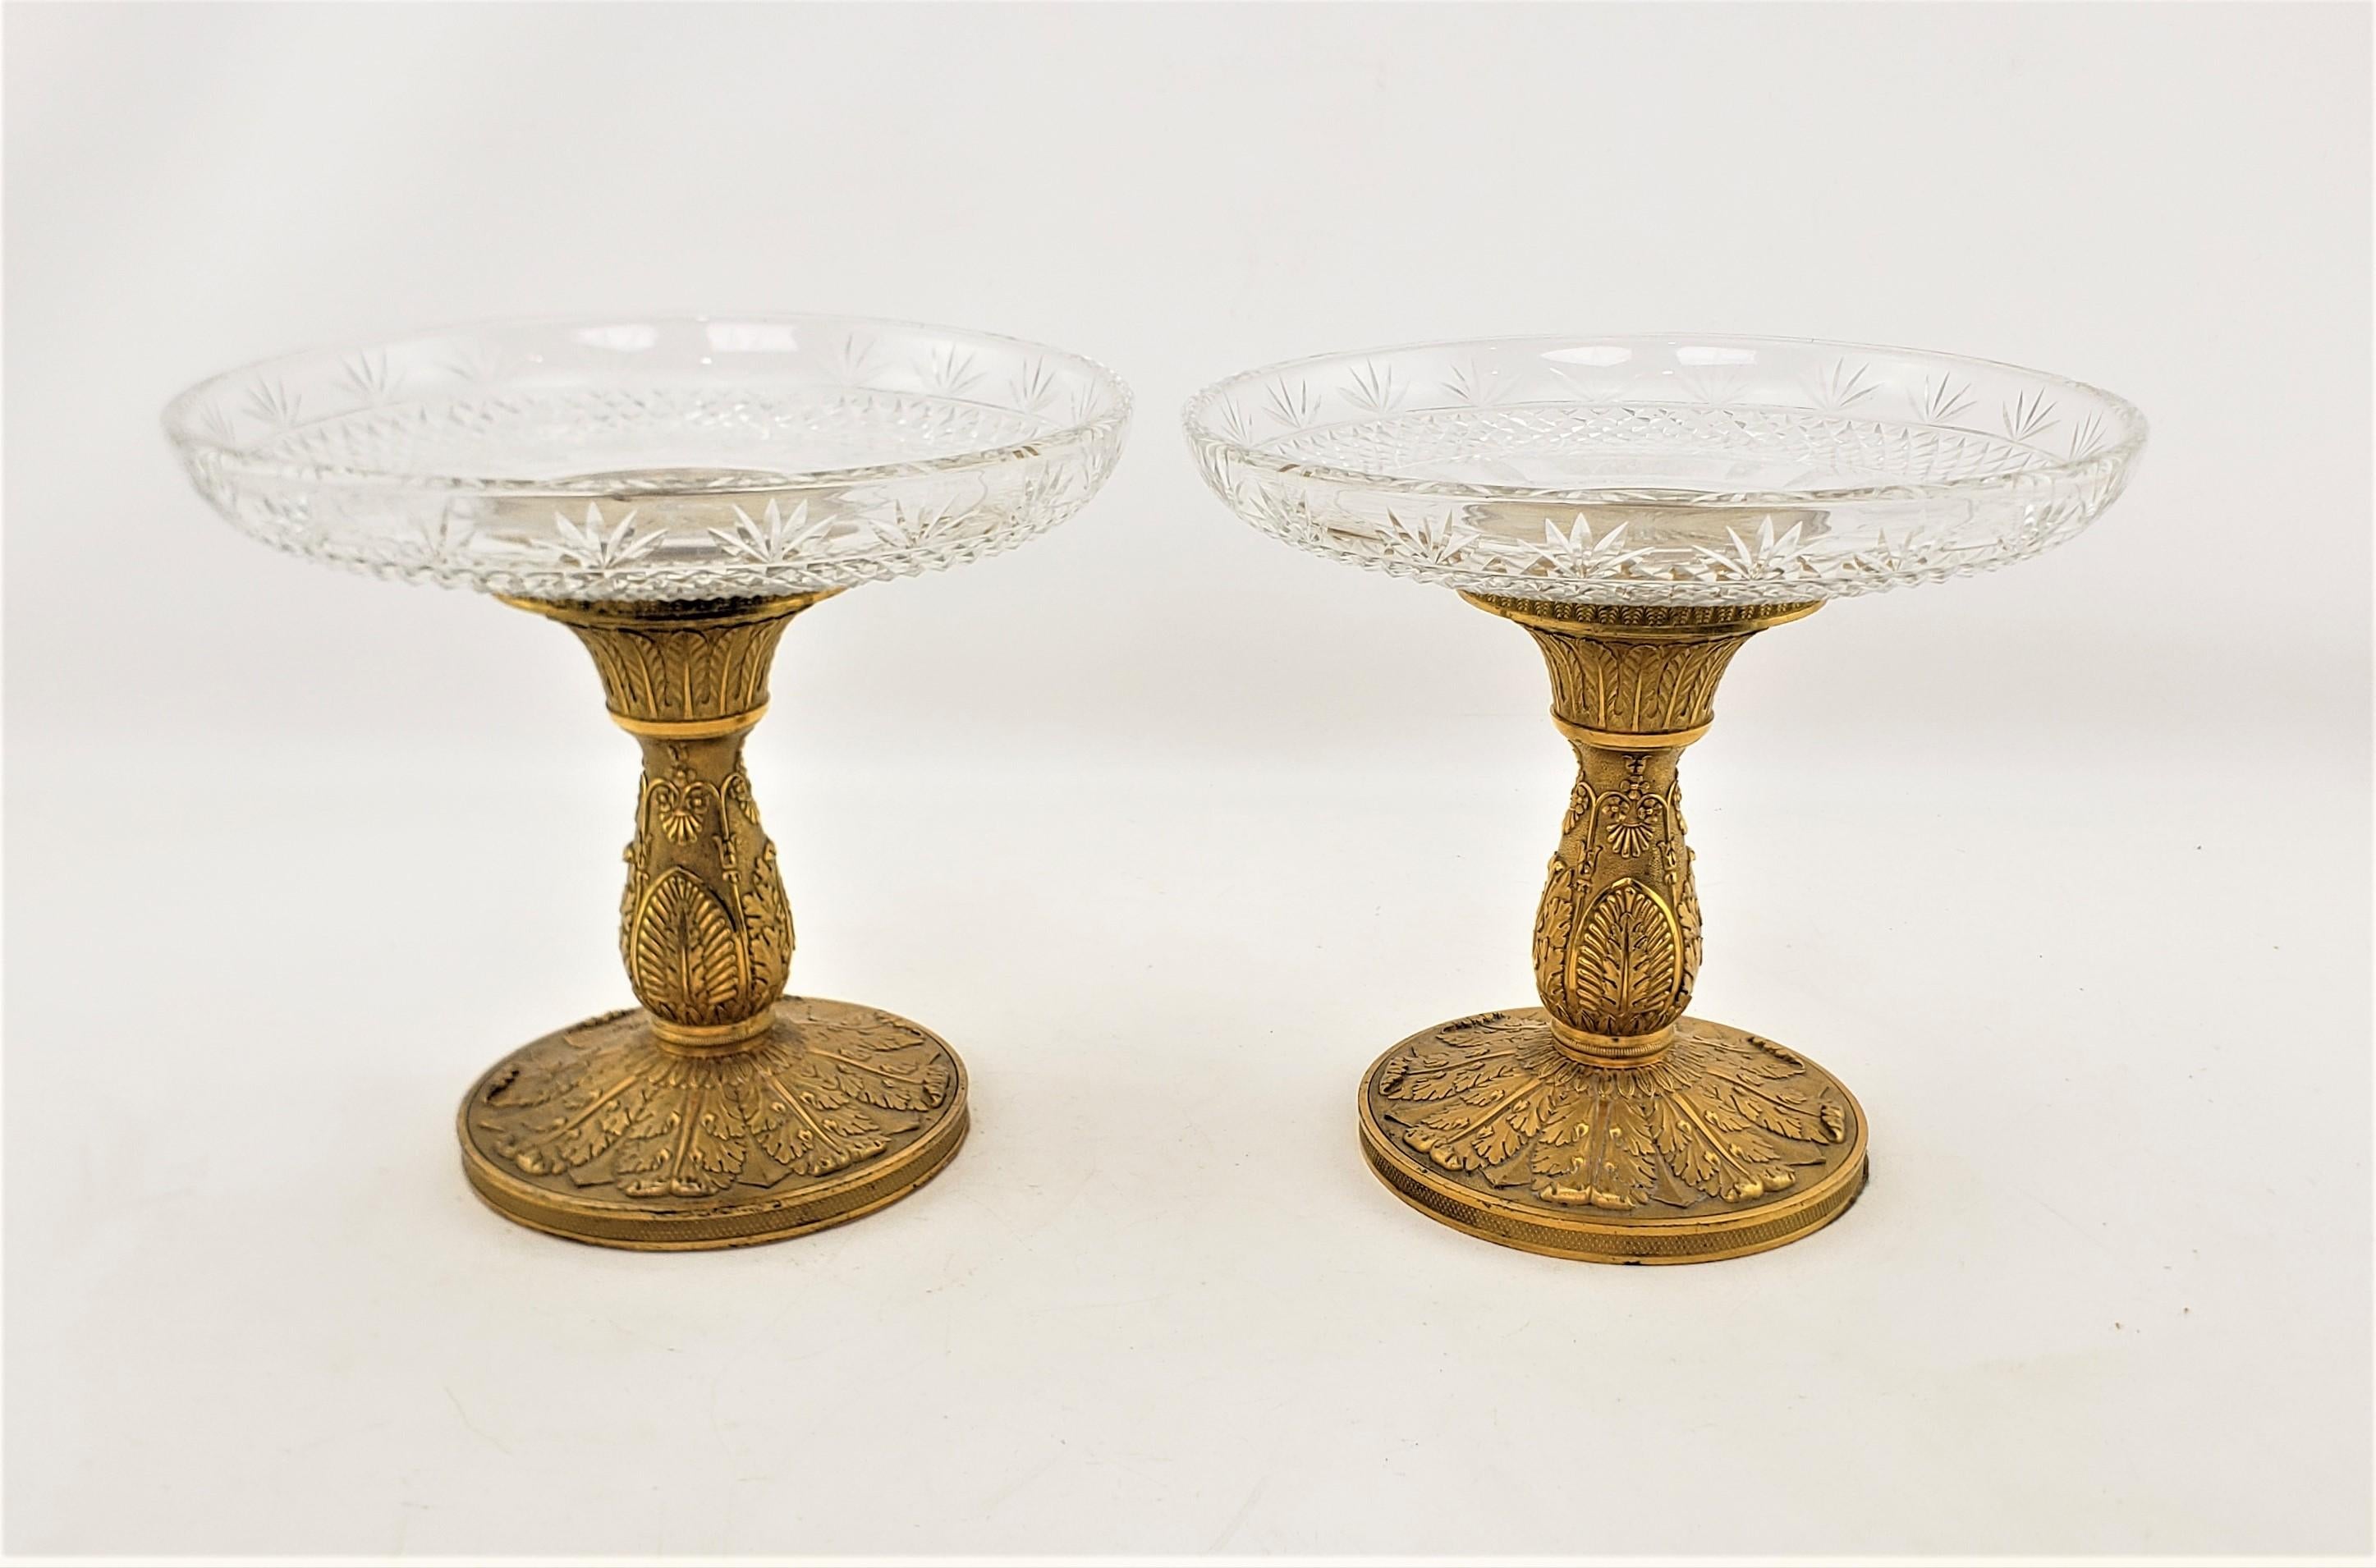 Neoclassical Pair of Antique Gilt Bronze & Crystal Tazzas or Pedestal Bowls For Sale